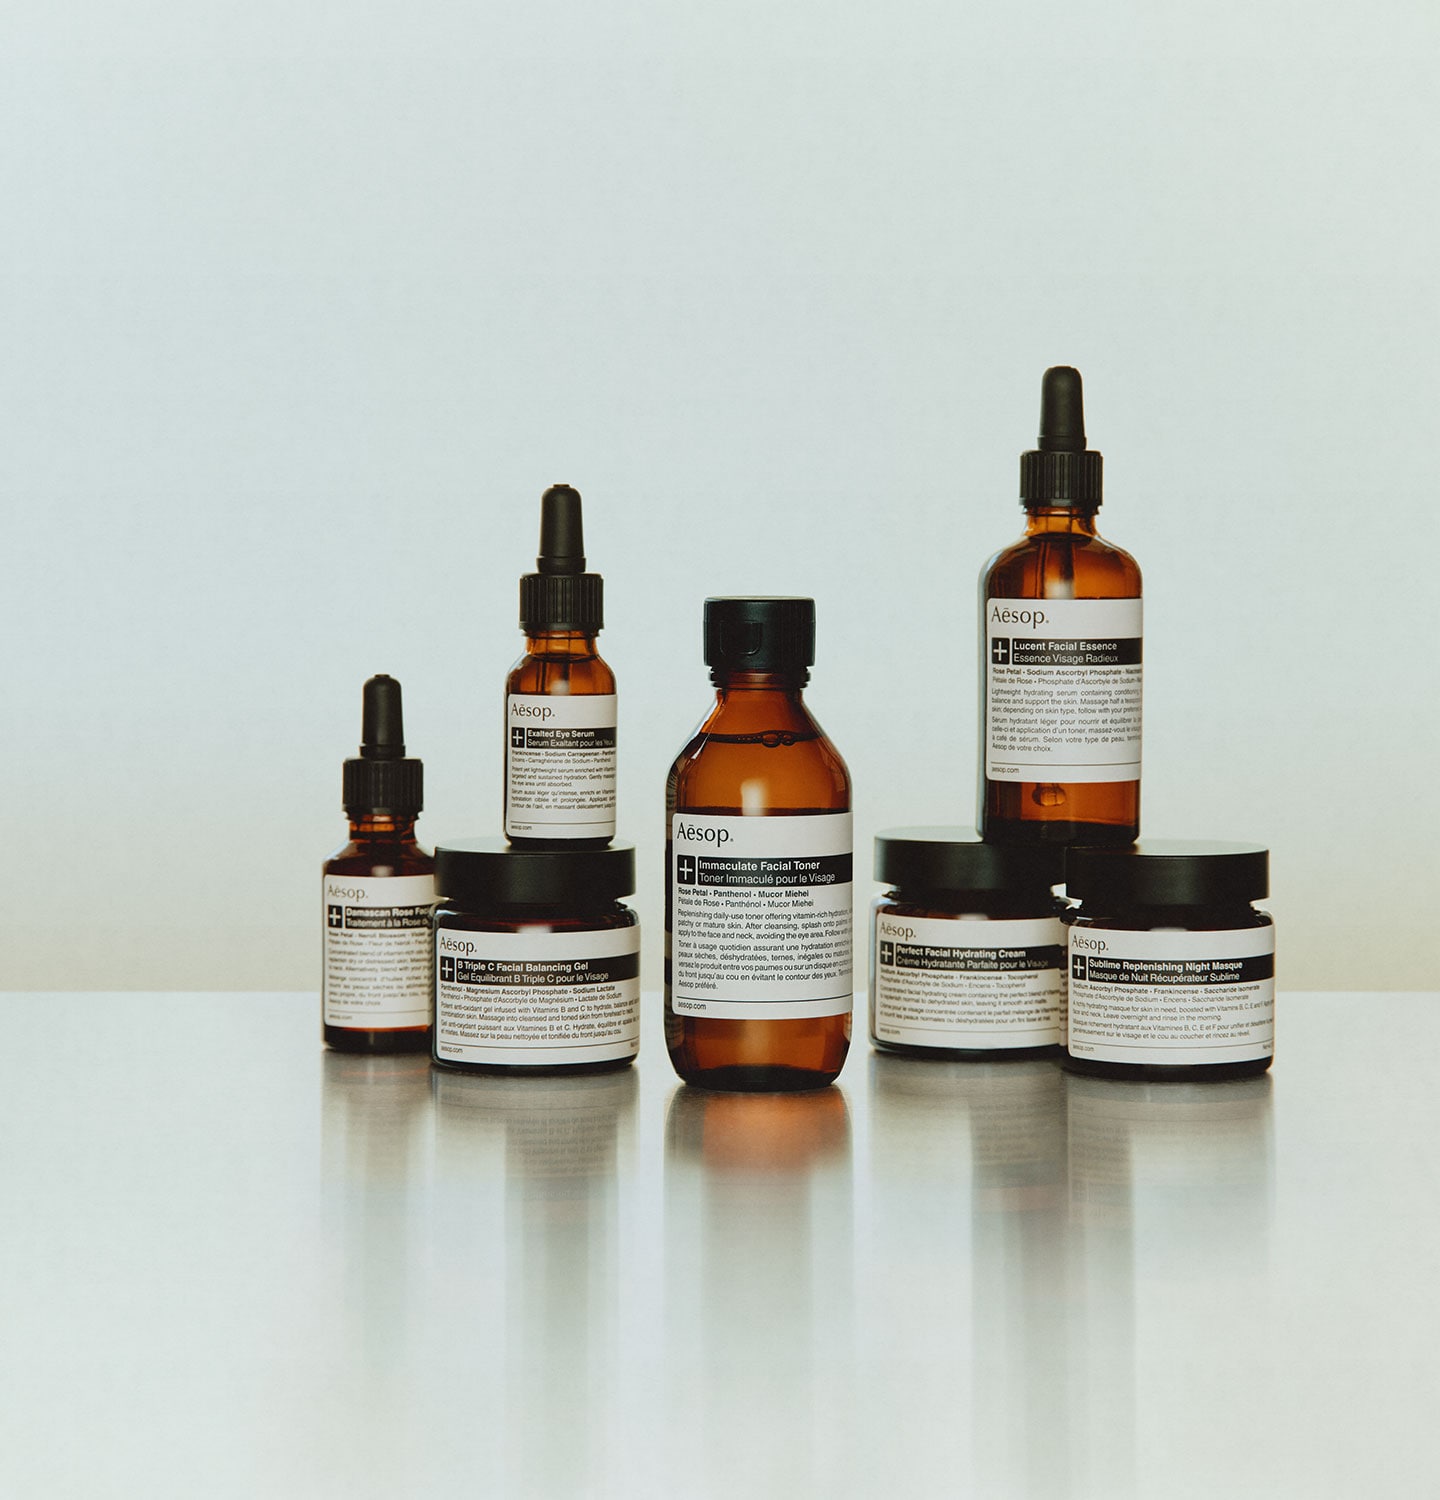 Aesop skincare plus range products placed on a metalic surface